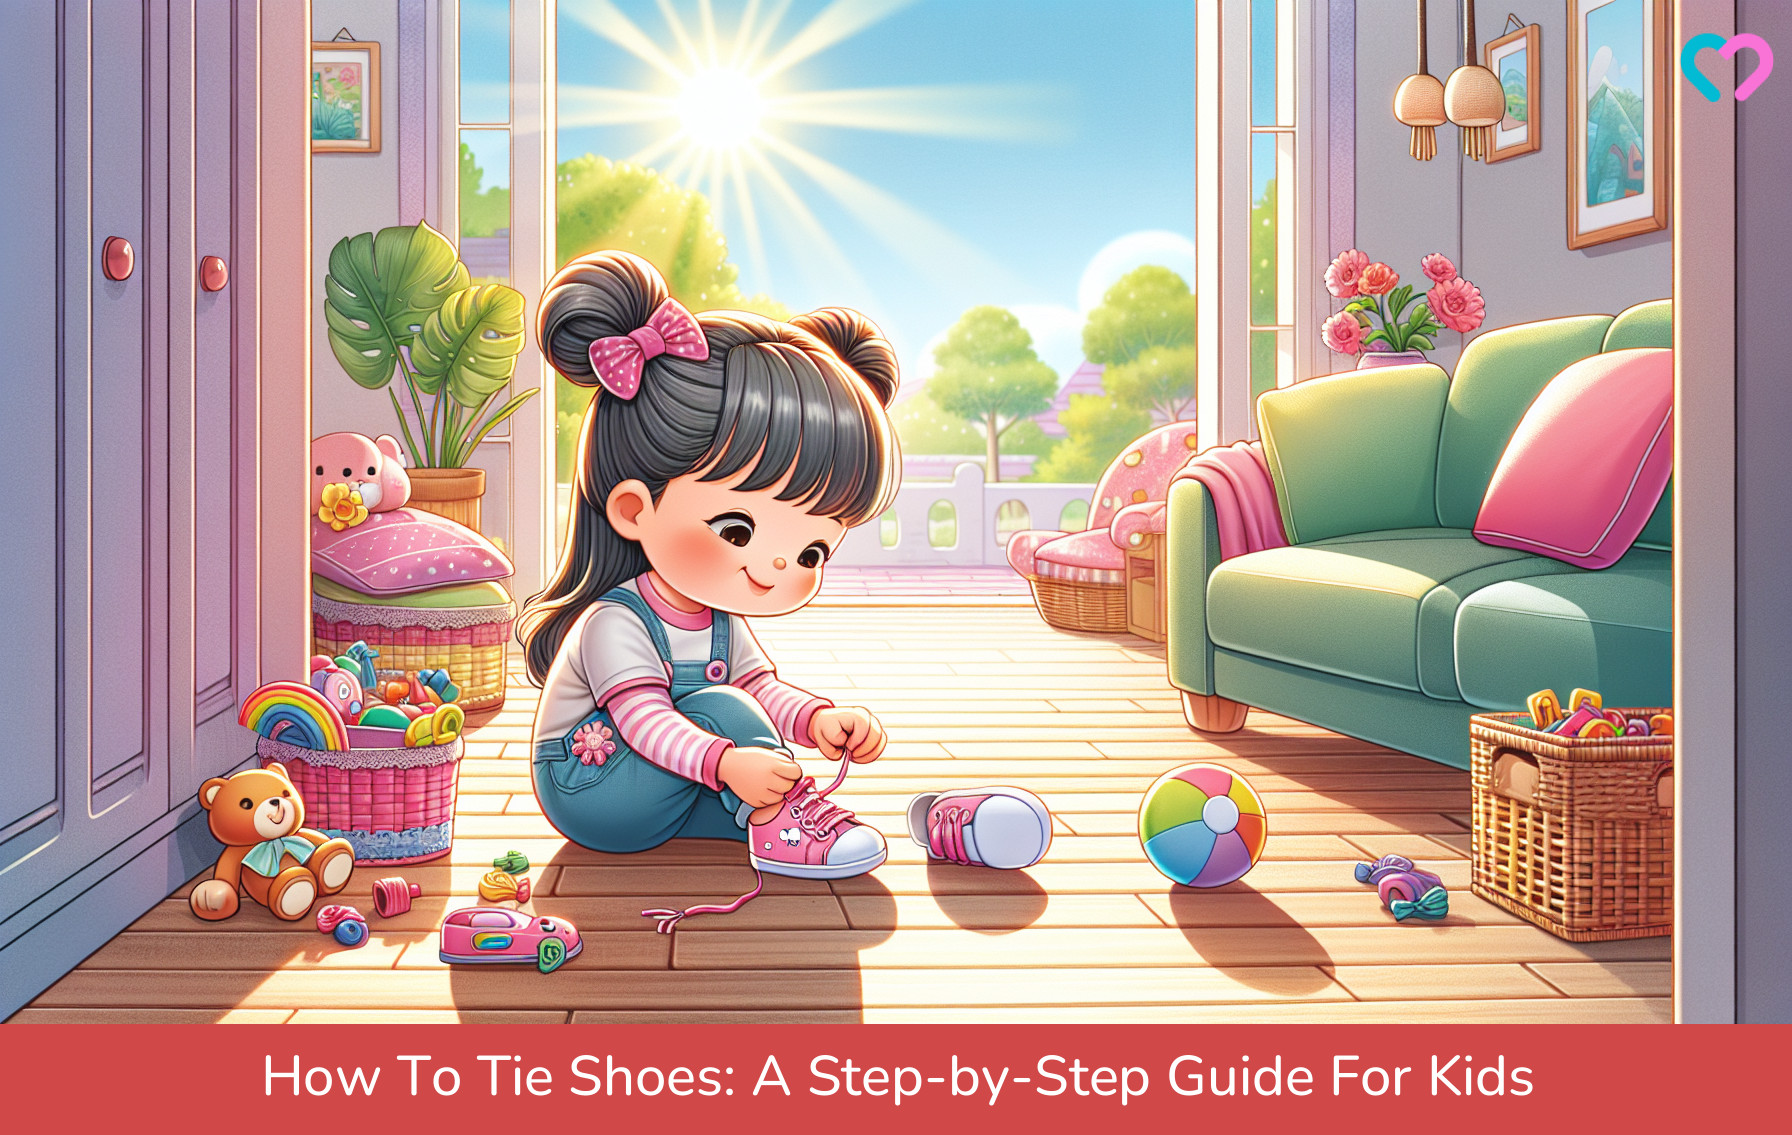 How To Tie Shoes_illustration